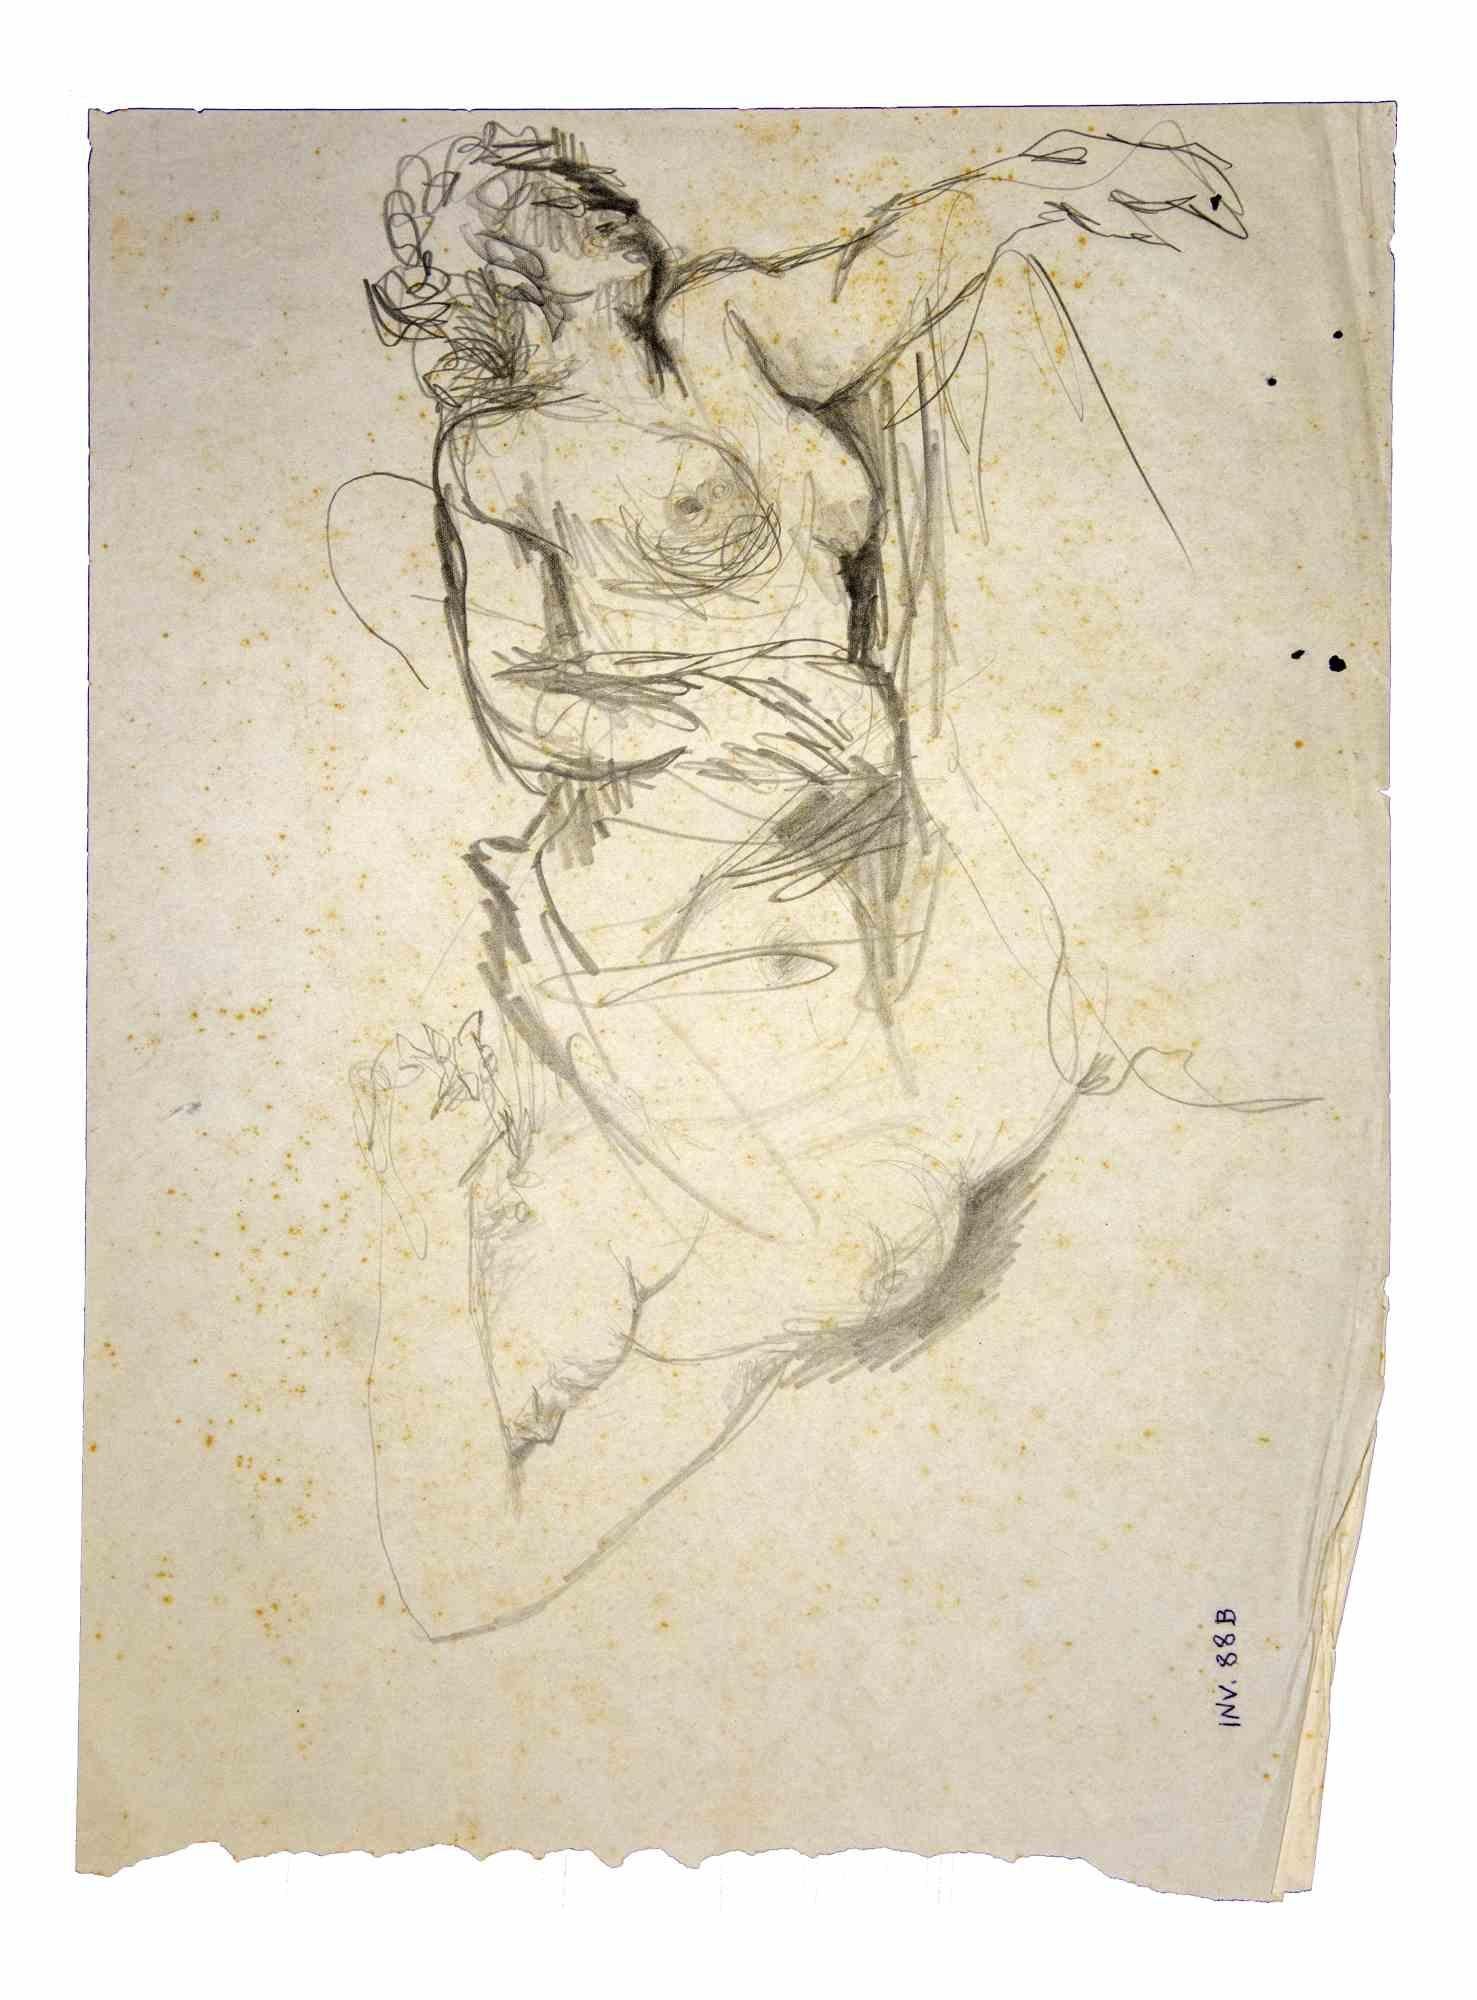 Female figure is an original artwork realized in the 1970s by the Italian Contemporary artist  Leo Guida  (1992 - 2017).

Original drawings in pencil on paper.

Fair conditions with consumed edges and cutaways on margin and some holes.

The artwork